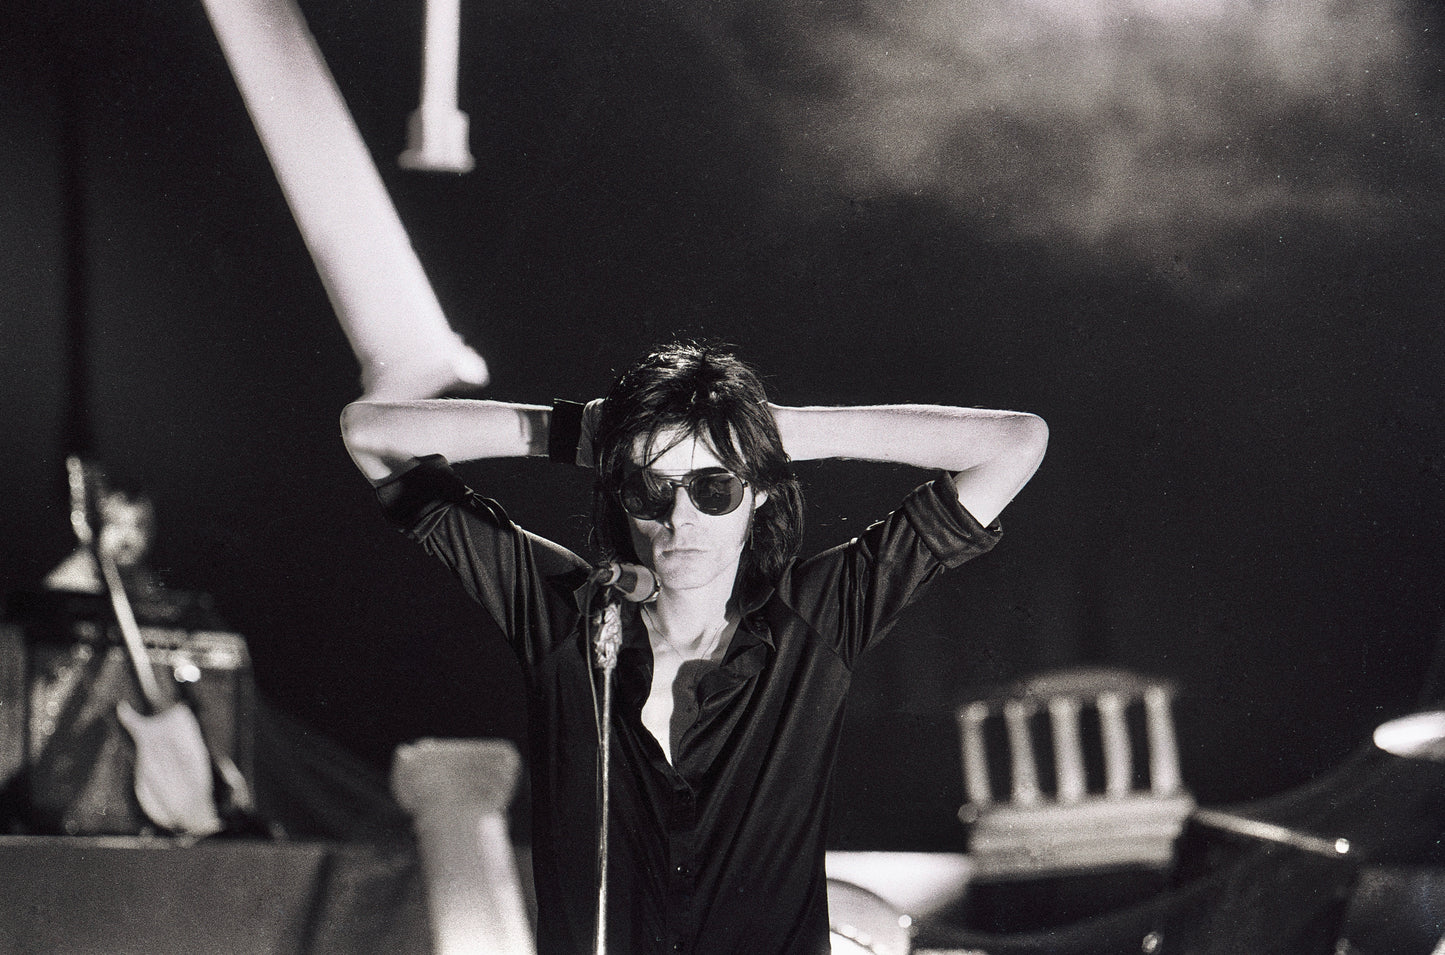 Steve Rapport "Andrew Eldritch of Sisters of Mercy #3" (1984)